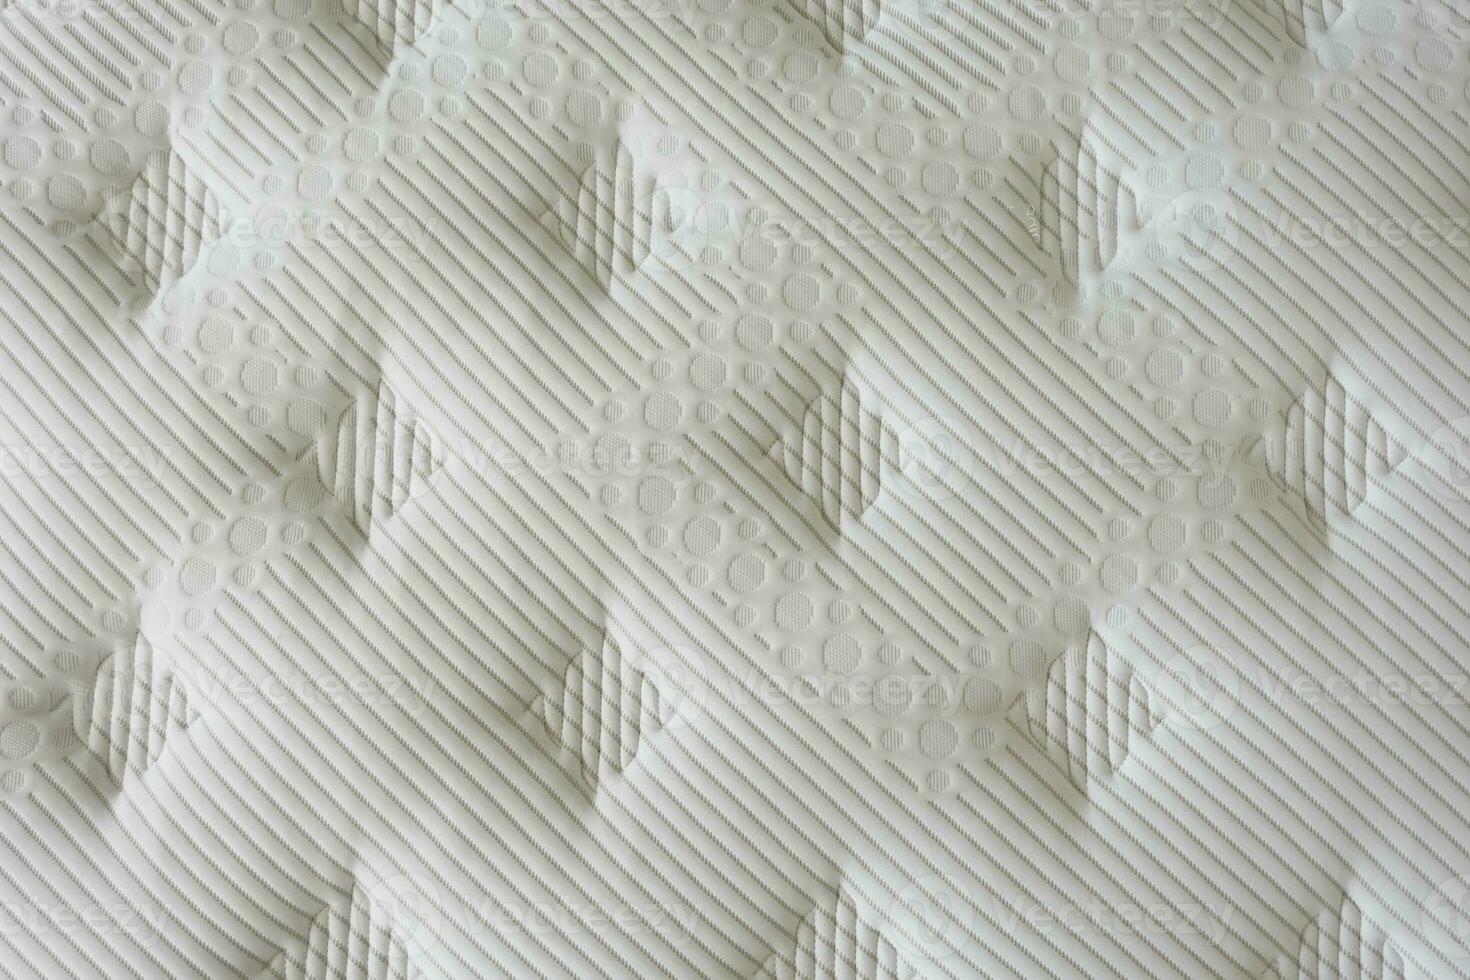 Background of comfortable mattress, top view photo